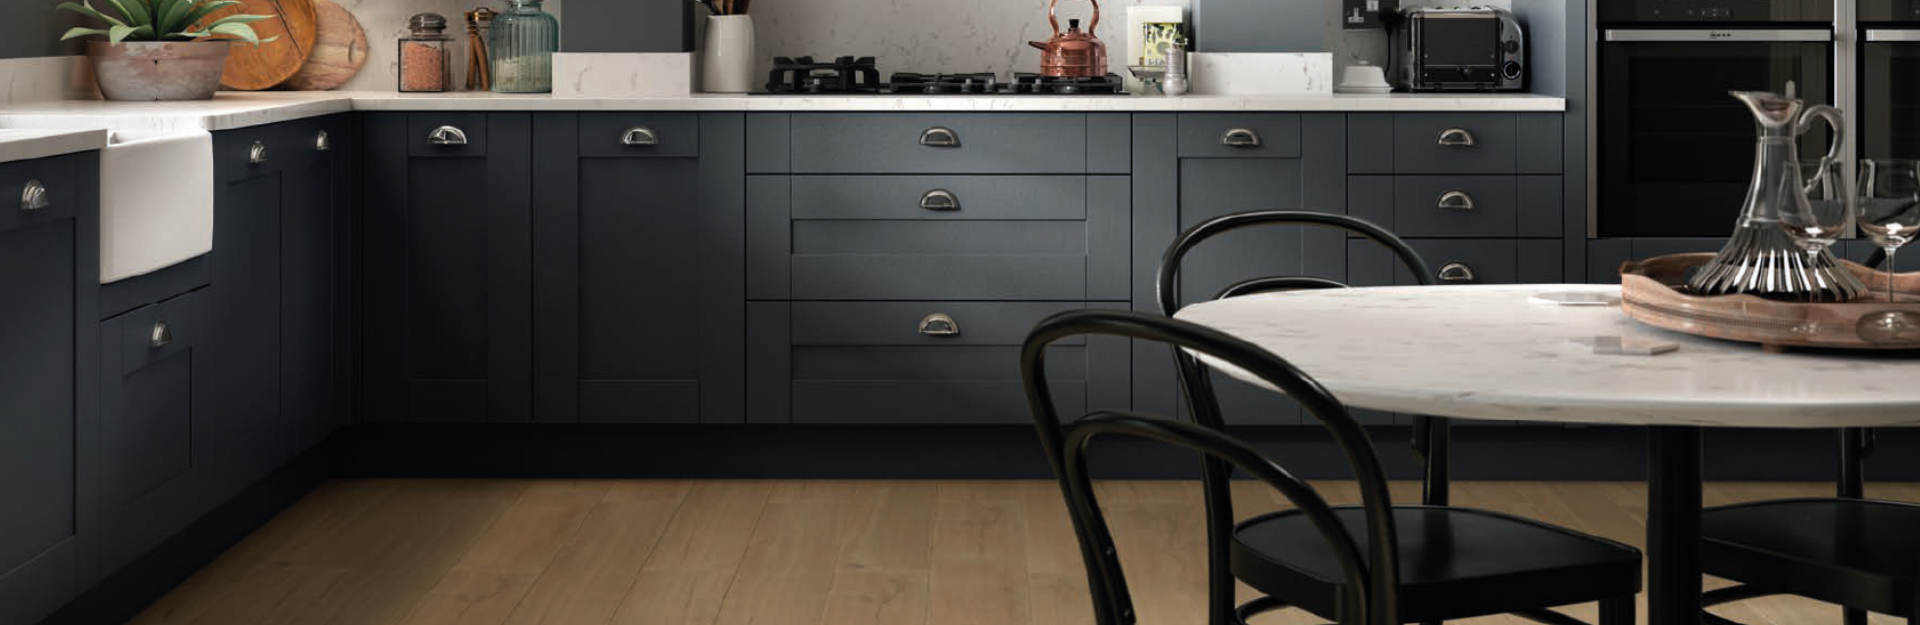 Kitchen Style Buying Guide Benchmarx Kitchens Joinery